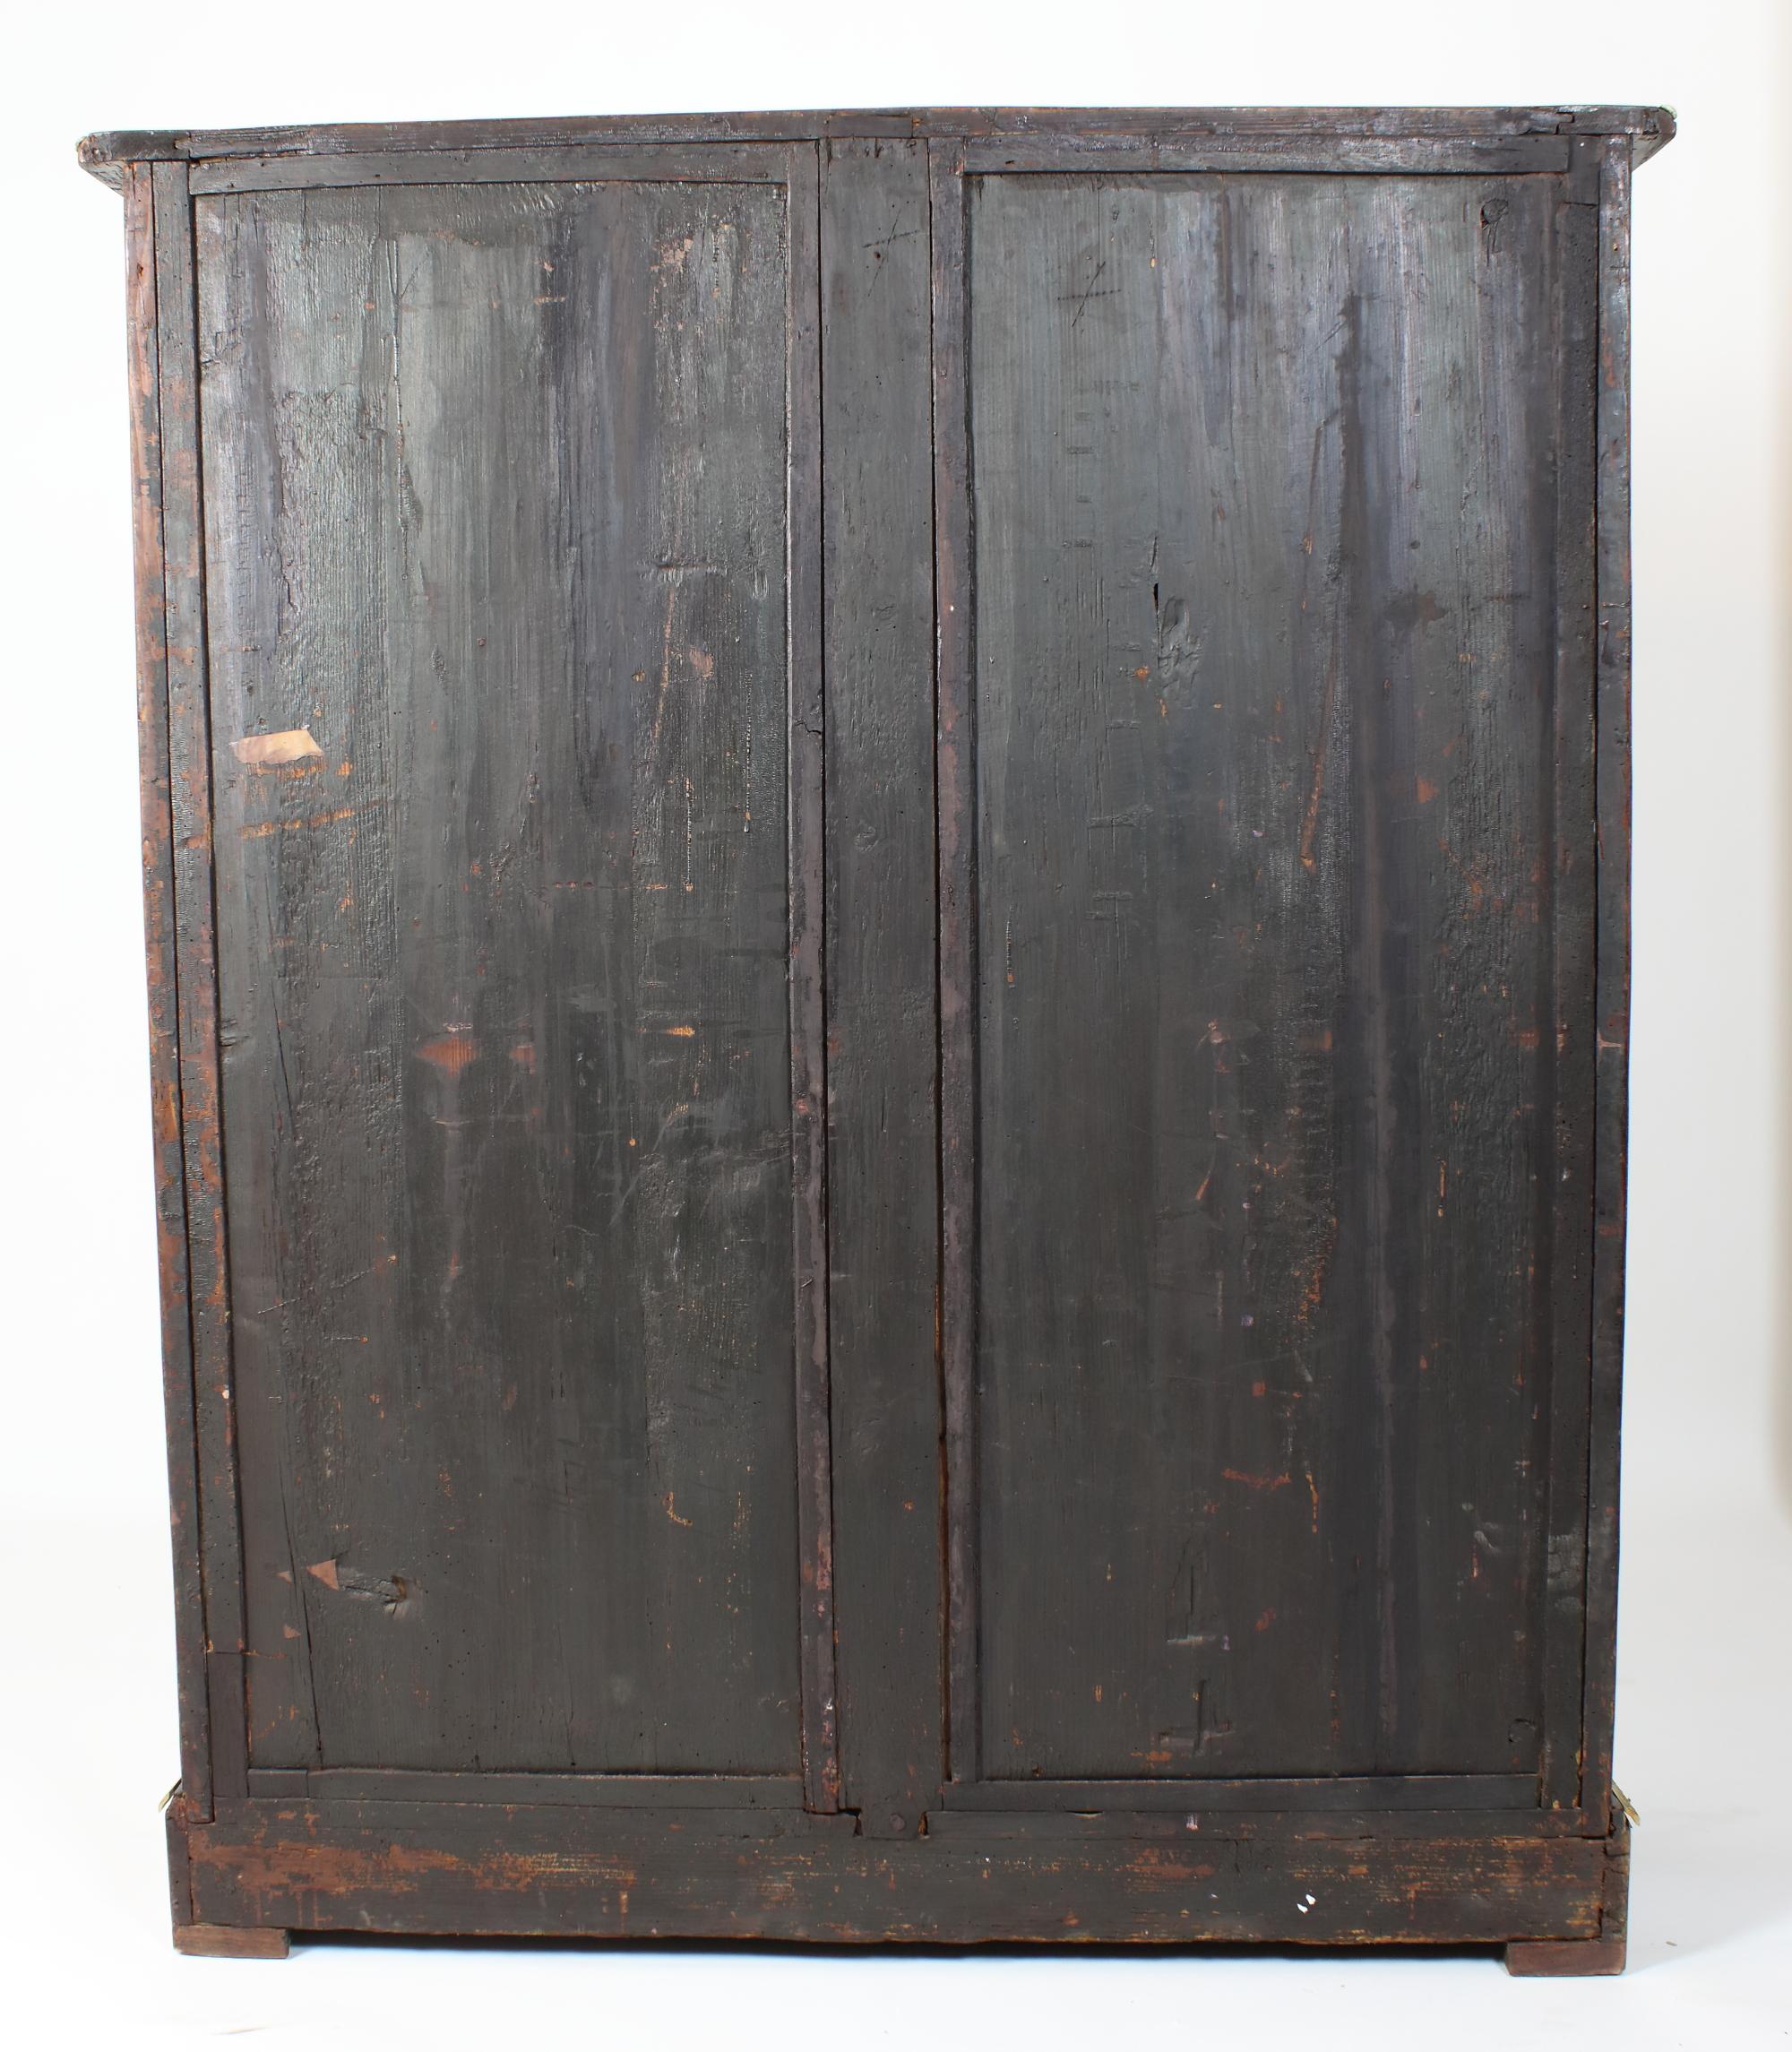 Gilt Early 18th Century French Louis XIV Régence Trellis Marquetry Armoire Wardrobe For Sale